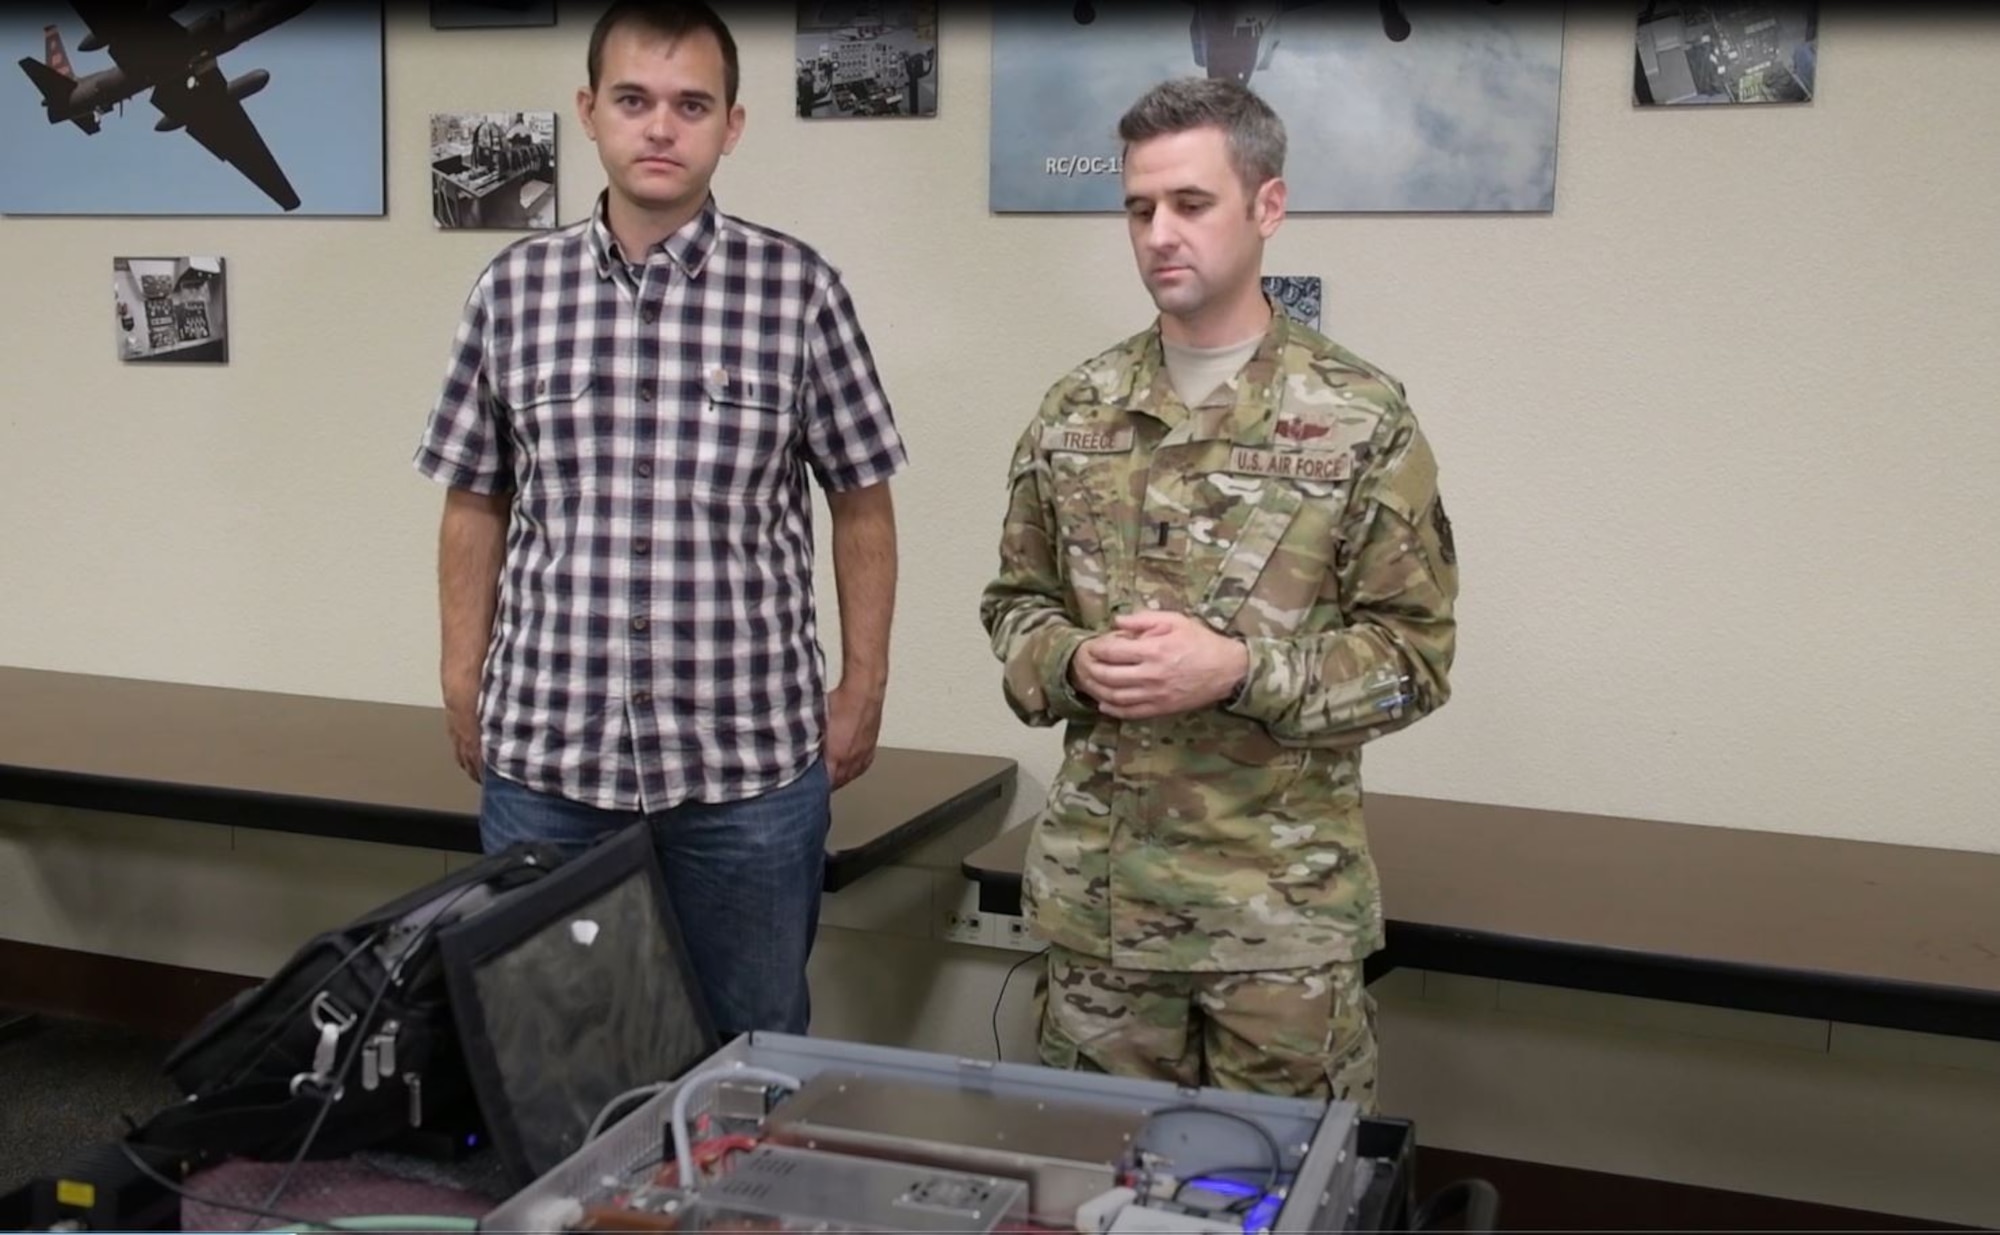 1st Lt. Adam Treece, 56th OSS intelligence readiness chief assigned to Luke Air Force Base, Arizona and Wylie Standage Beier, ASU electrical engineering PhD student, brief about their Spark Tank submission the Low Cost Threat Emitter Replication